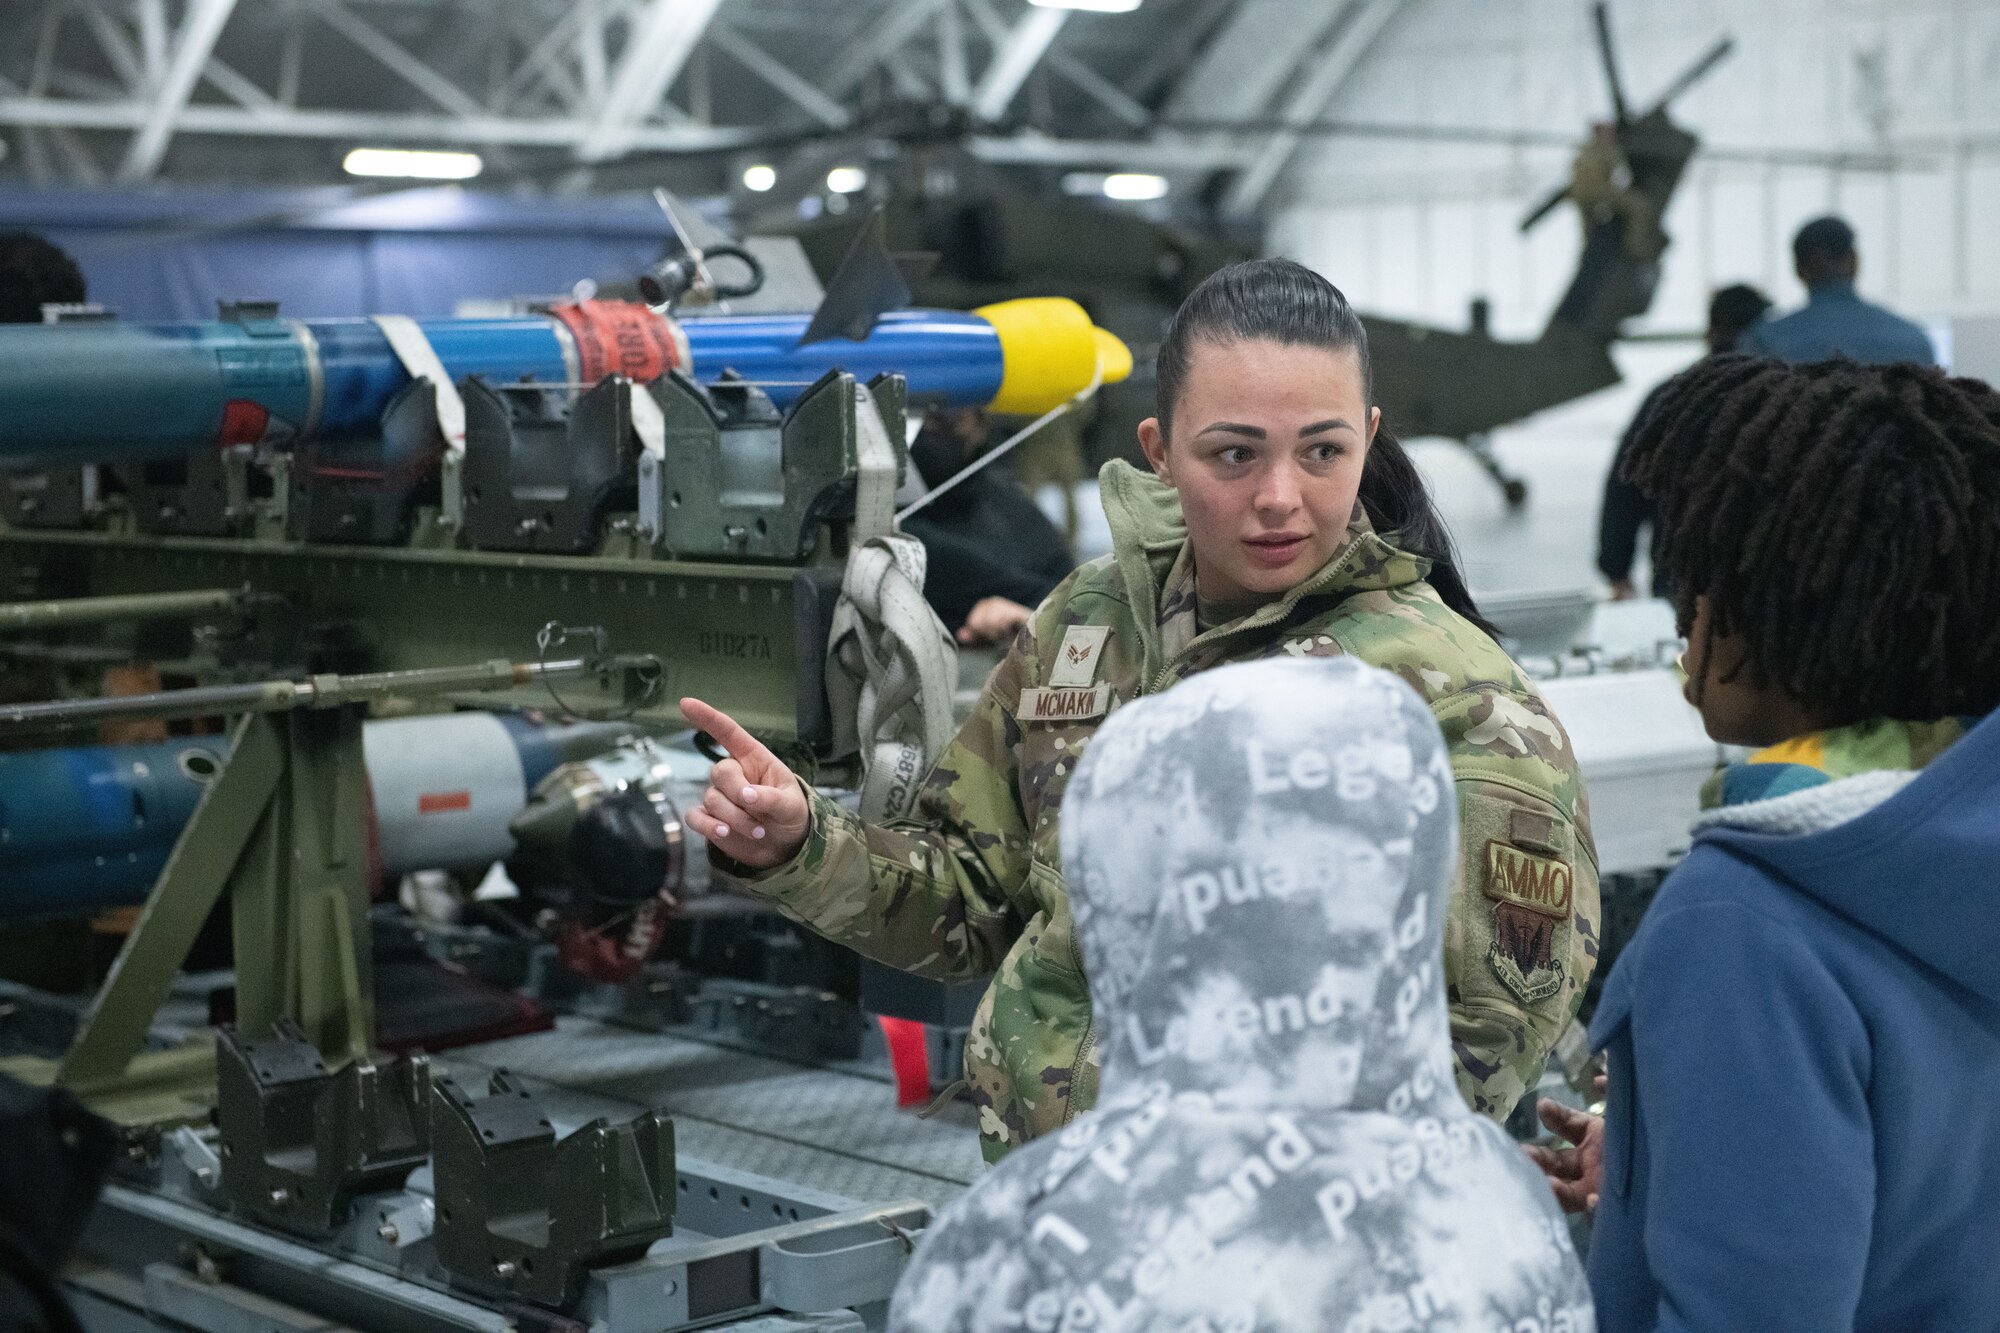 U.S. Air Force Senior Airman Mistie McMakin, 53rd fighter squadron munitions technician, showcases training munitions to students during the Annual Aerospace Summit at Joint Base Andrews, Md., March 9, 2023. The summit featured 14 Science, Technology, Engineering, Arts and Math related workshops. (U.S. Air Force photo by Senior Airman Daekwon Stith)